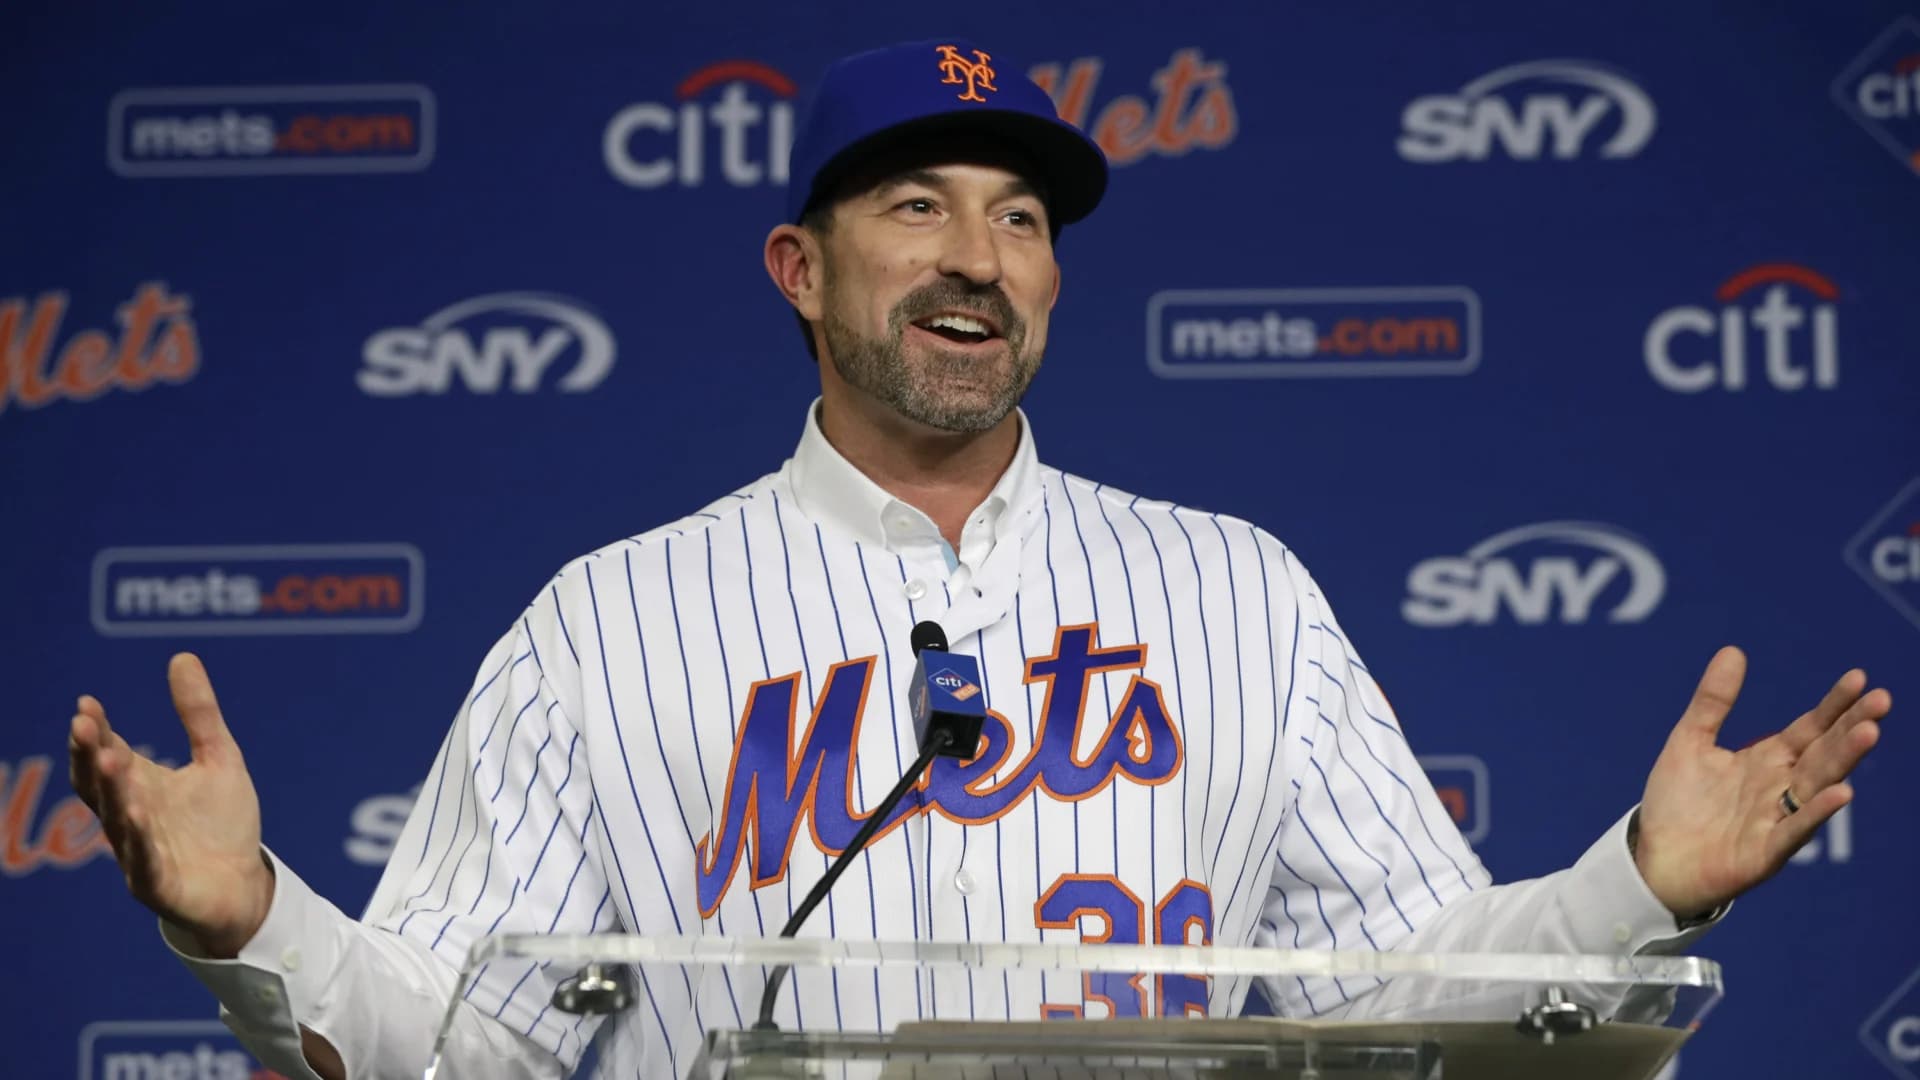 Mickey Callaway banned through at least 2022 after harassment probe